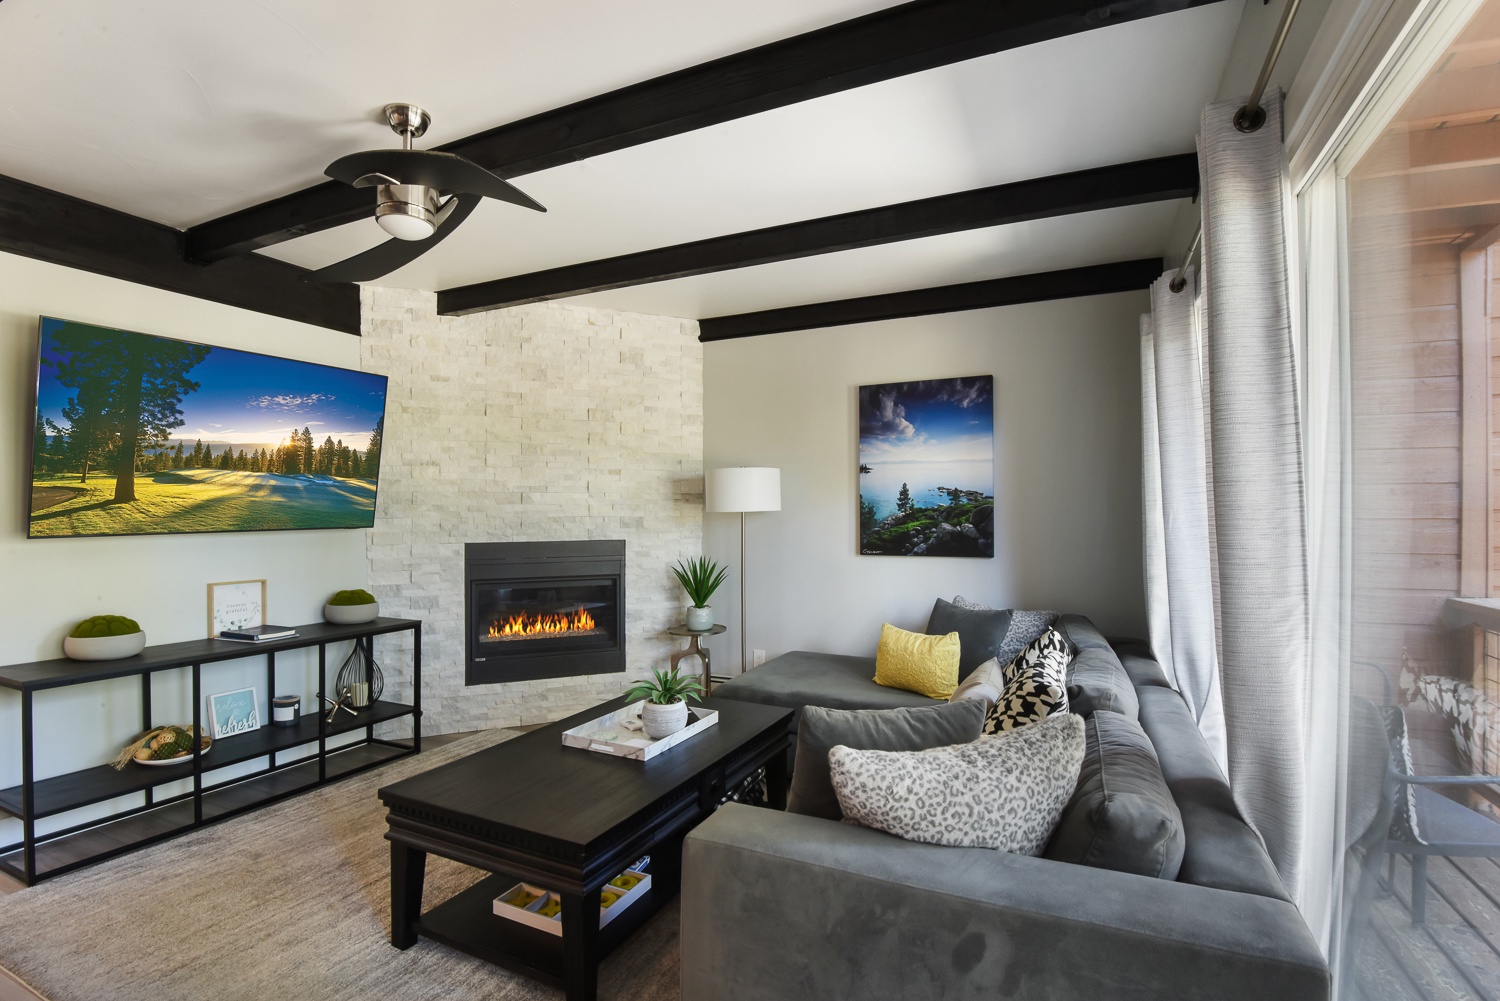 Stream all your favorite entertainment & enjoy the fireplace in the living room